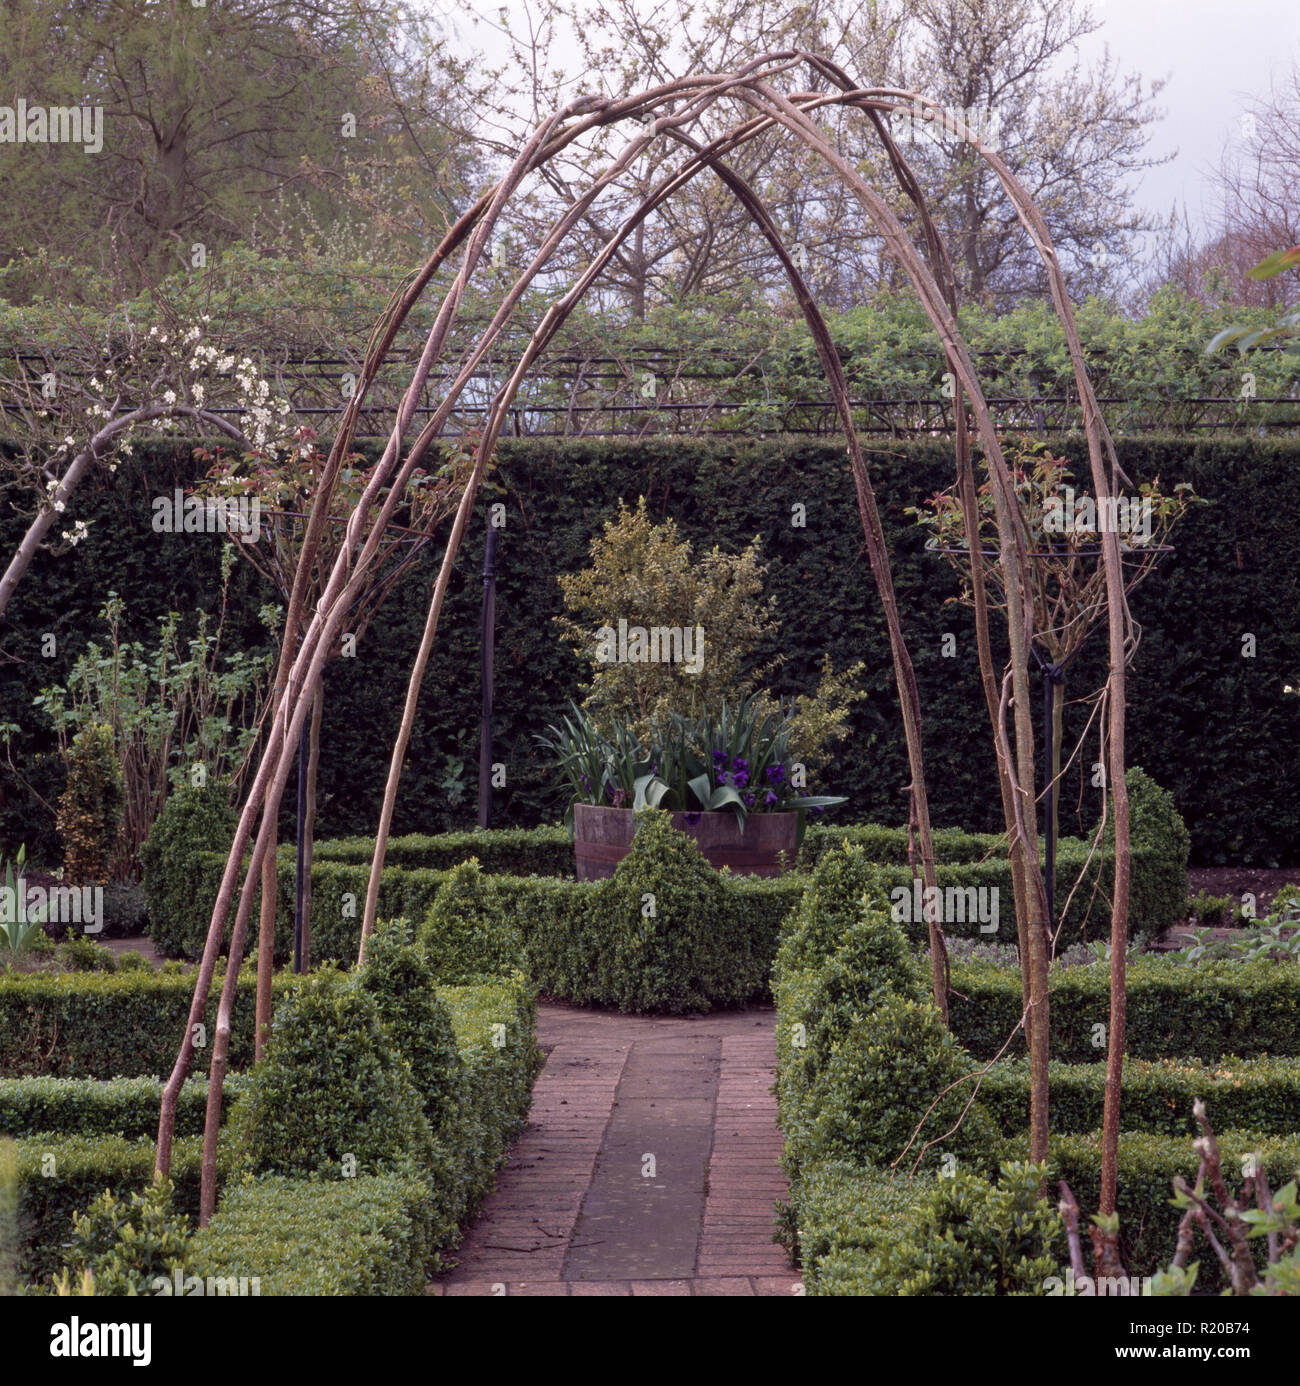 Hazel arch in knot garden with topiary Stock Photo